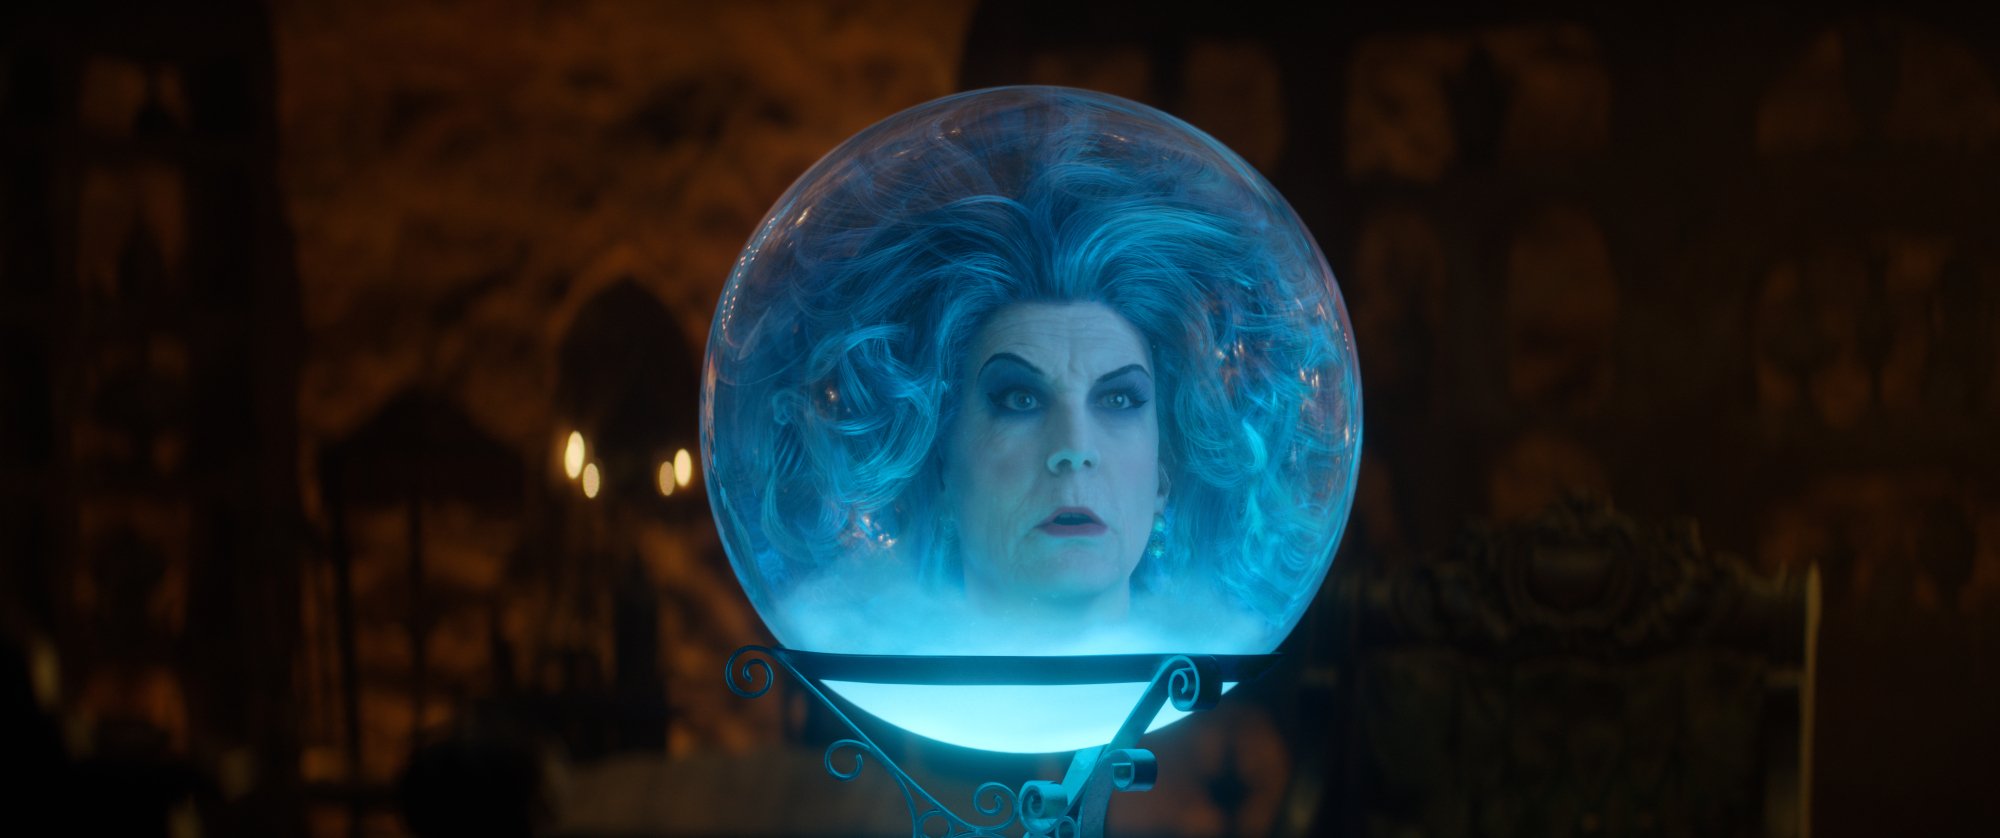 Jamie Lee Curtis as Madame Leota in Disney's live-action HAUNTED MANSION.